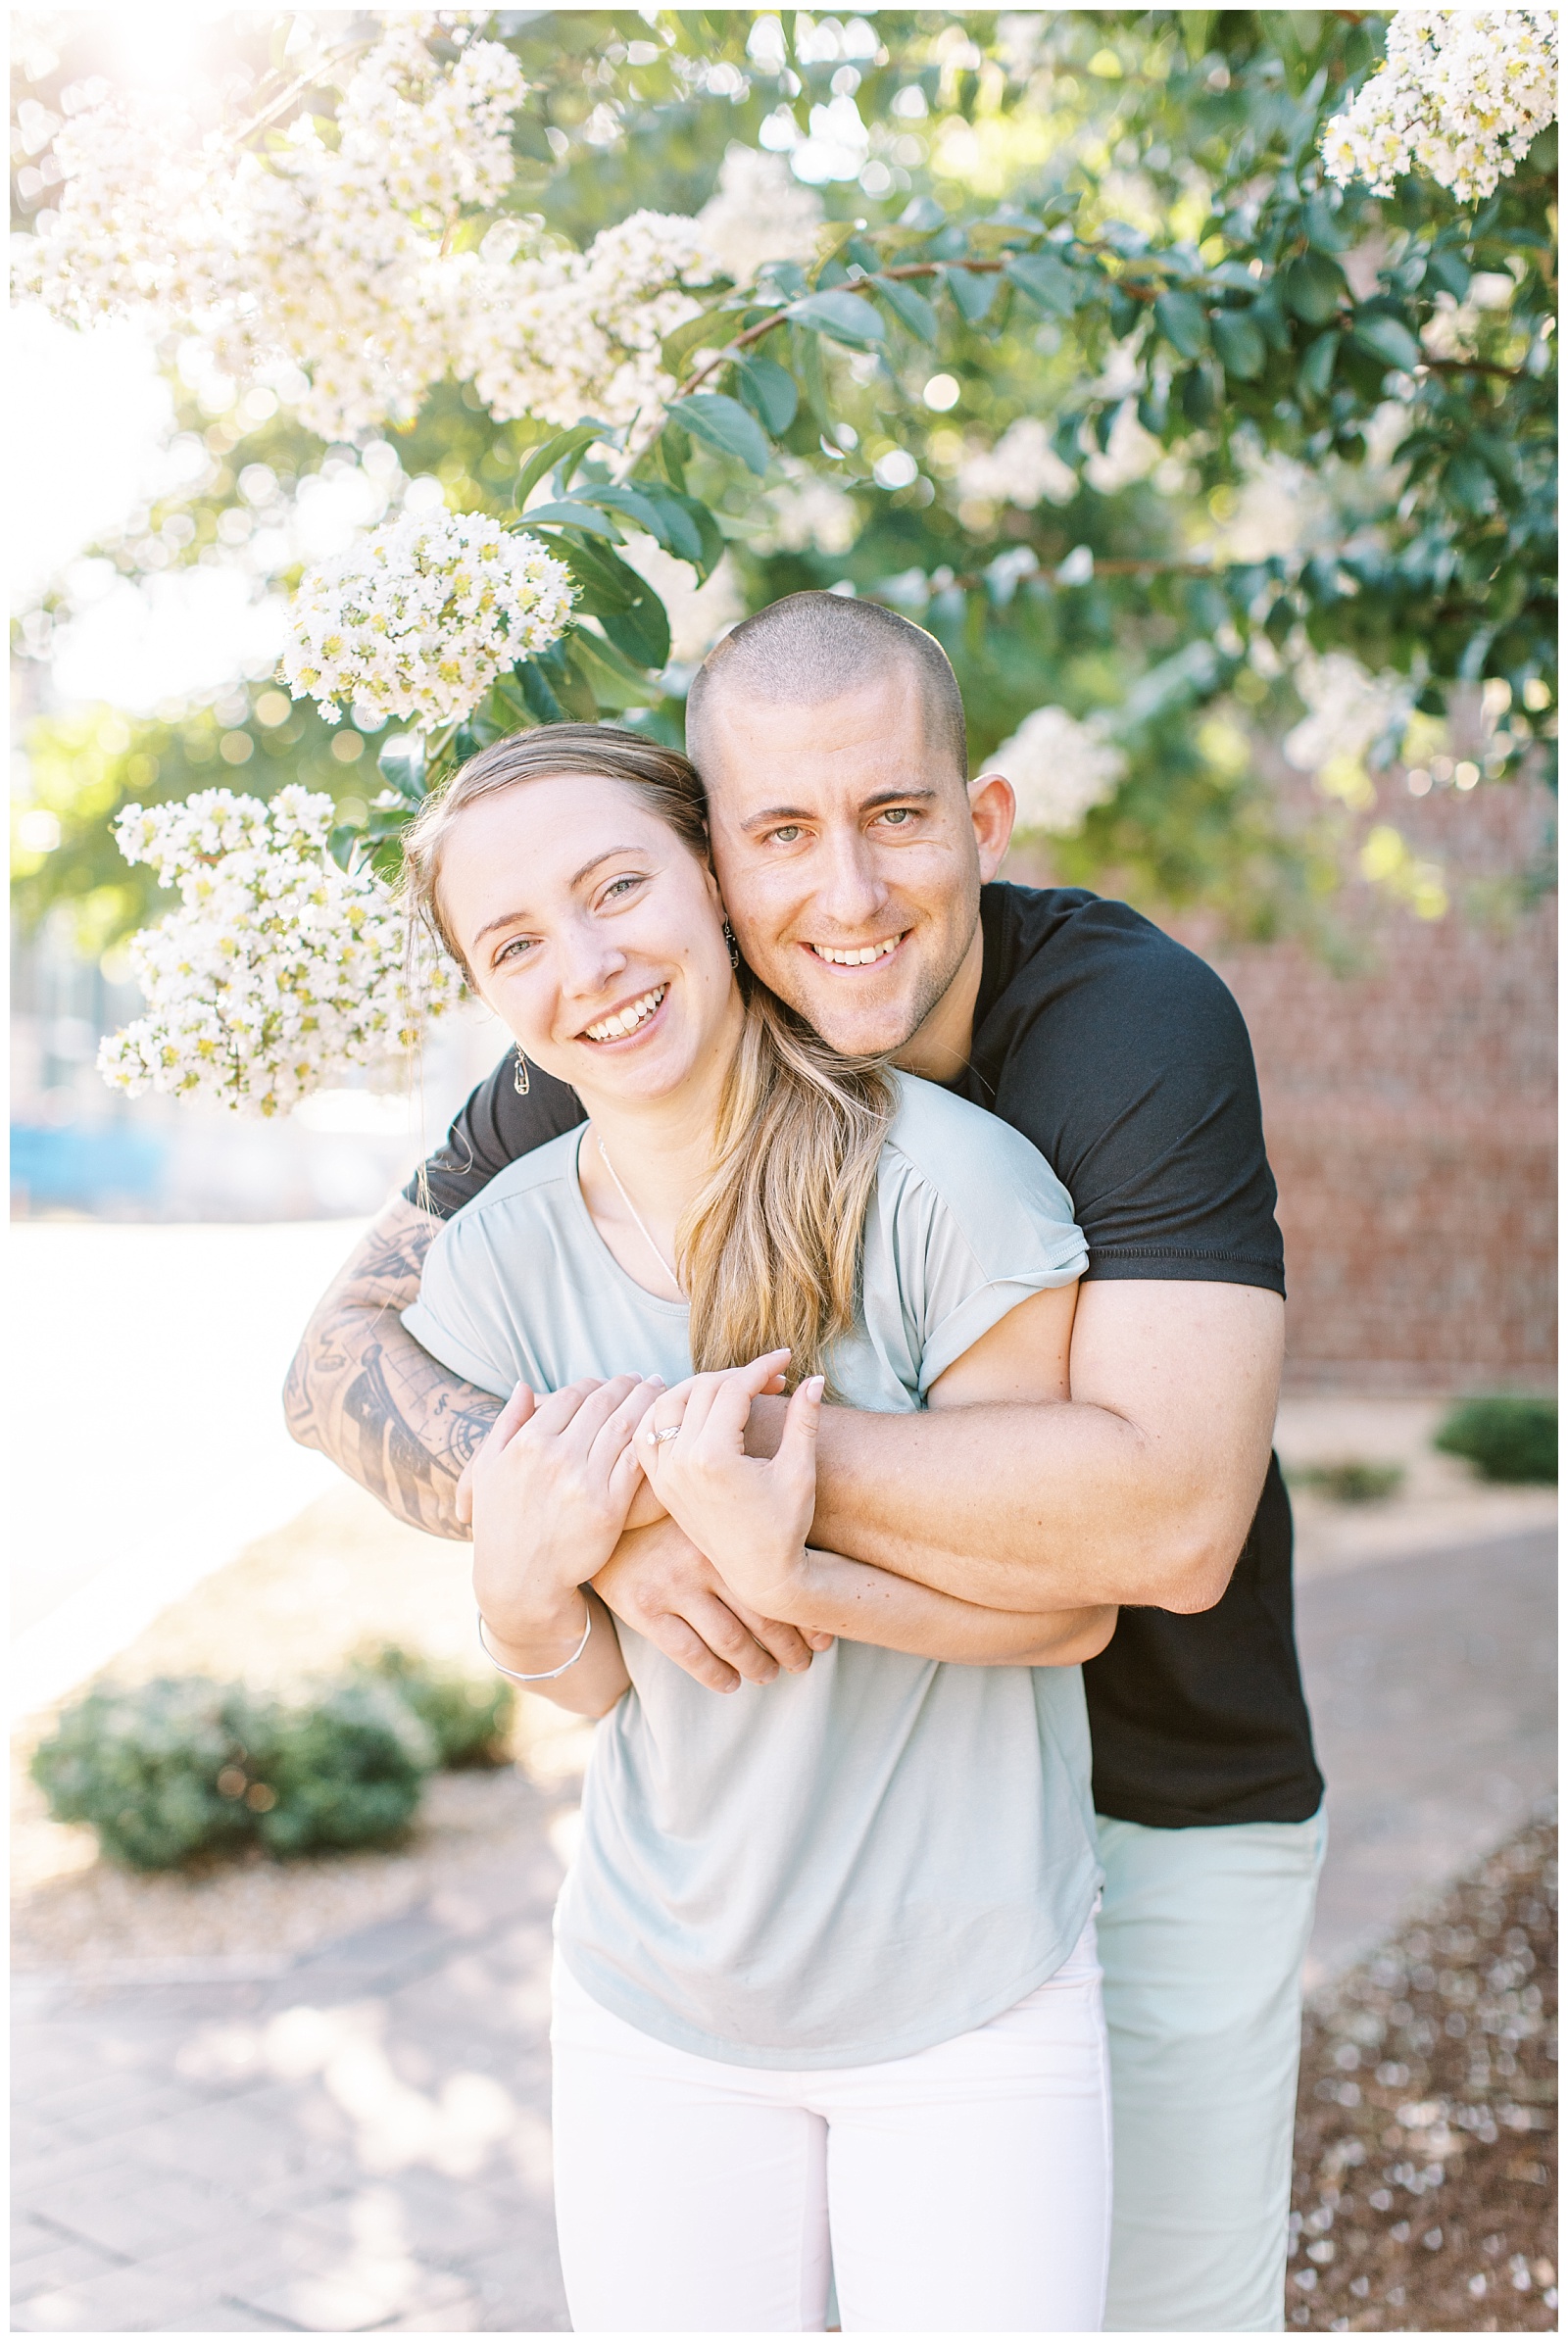 Downtown Cary Engagement Session | Raleigh Wedding Photographer | Sarah Hinckley Photography